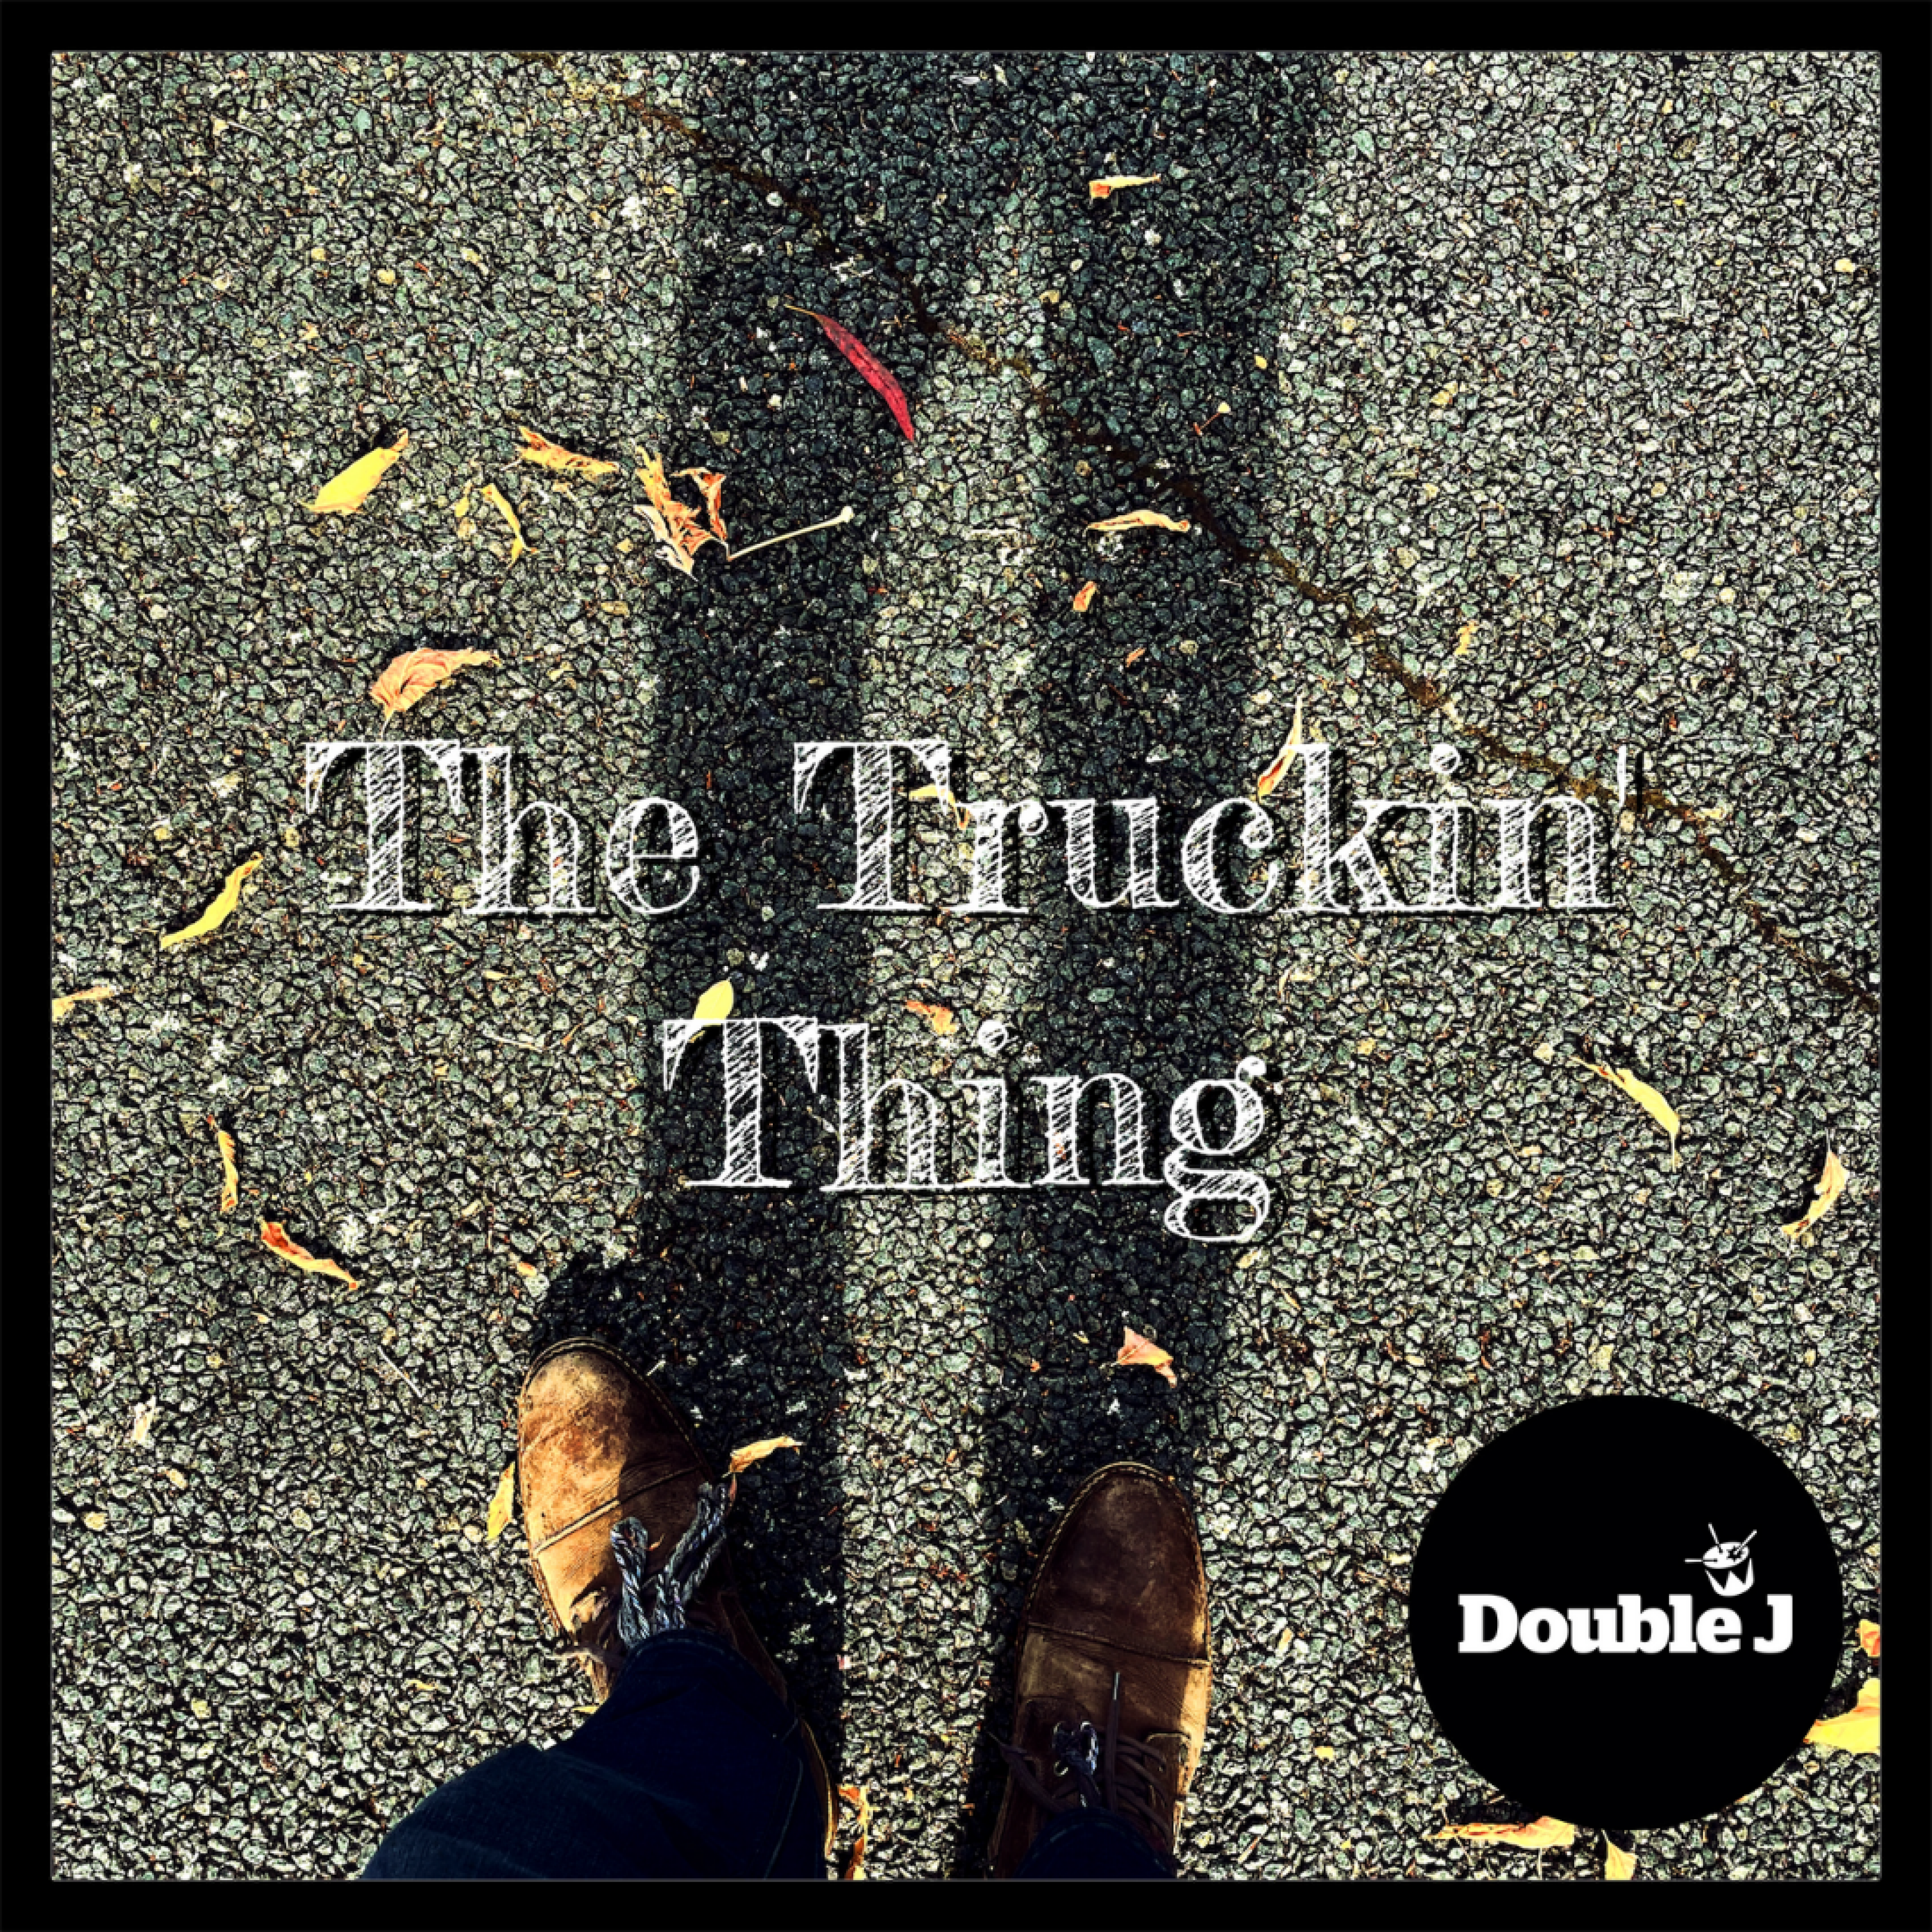 The Royal Belgian Conspiracy - 'The Truckin' Thing' First Play on Double J